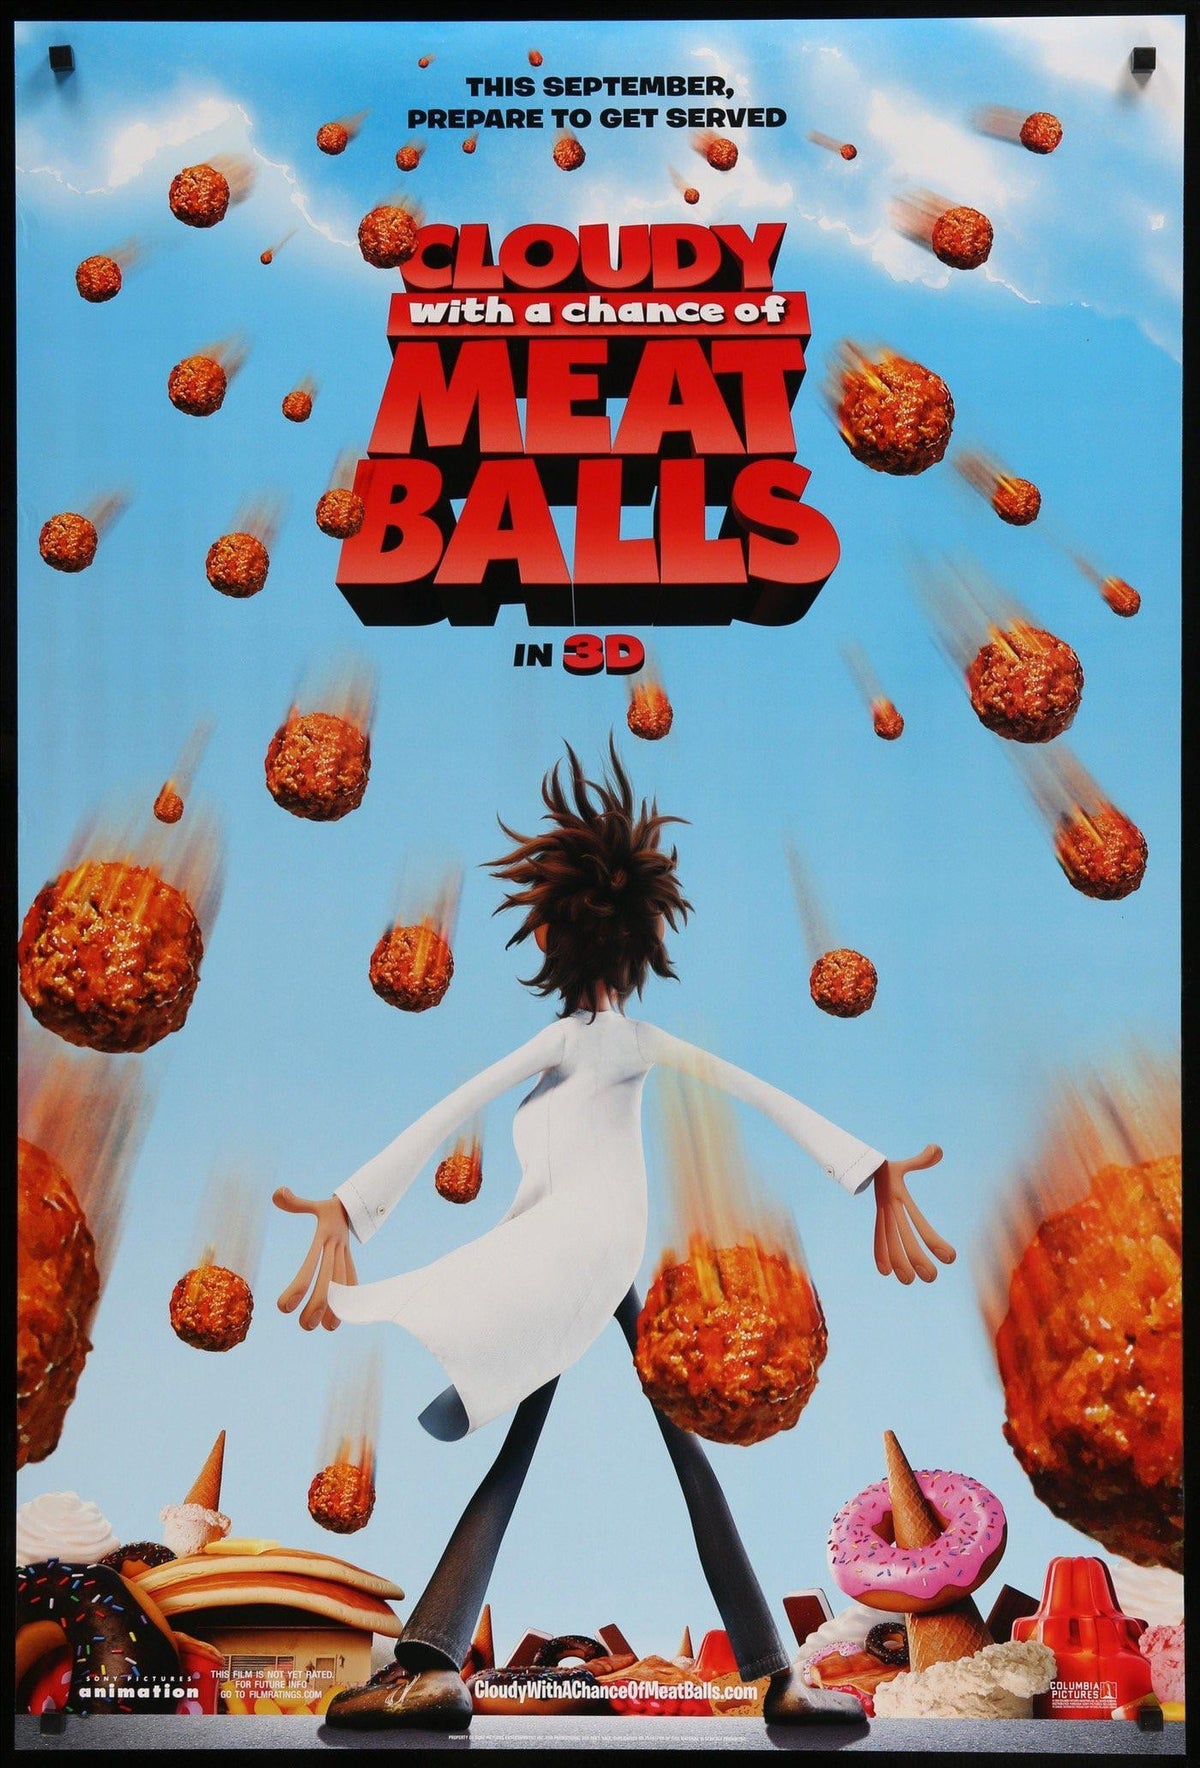 Cloudy With a Chance of Meatballs (2009) original movie poster for sale at Original Film Art